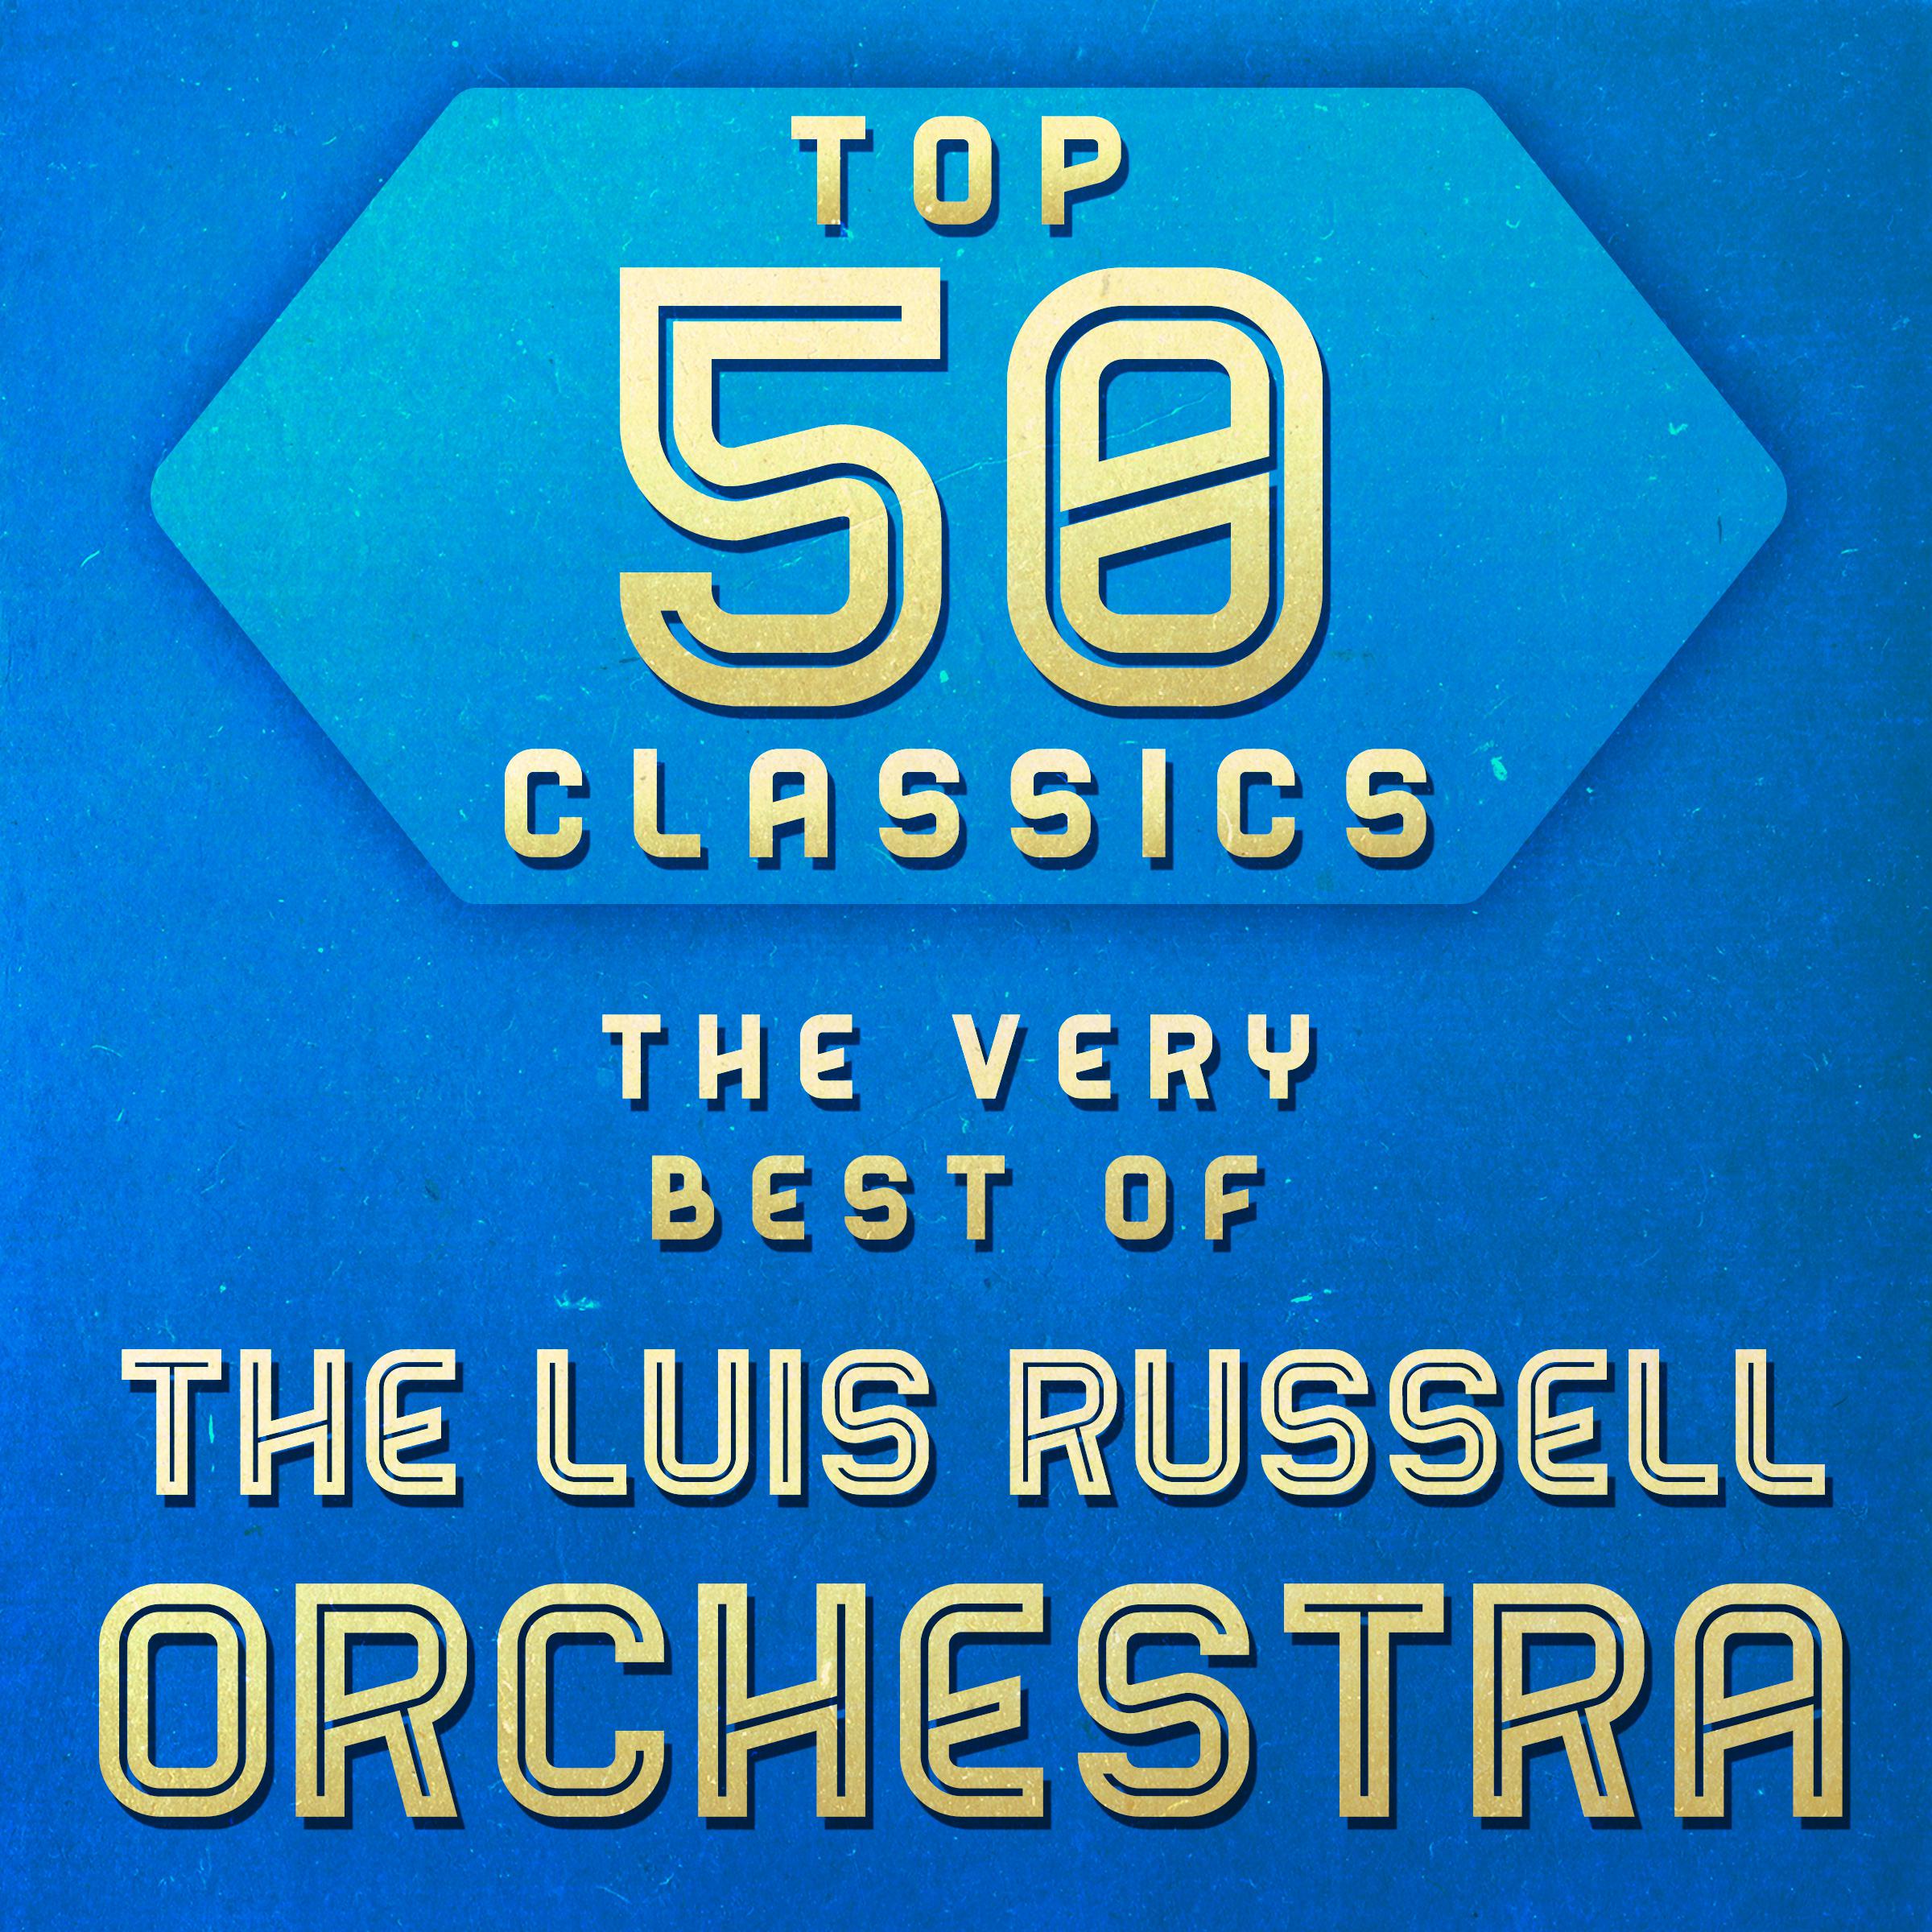 Luis Russell Orchestra - After Hour Creep